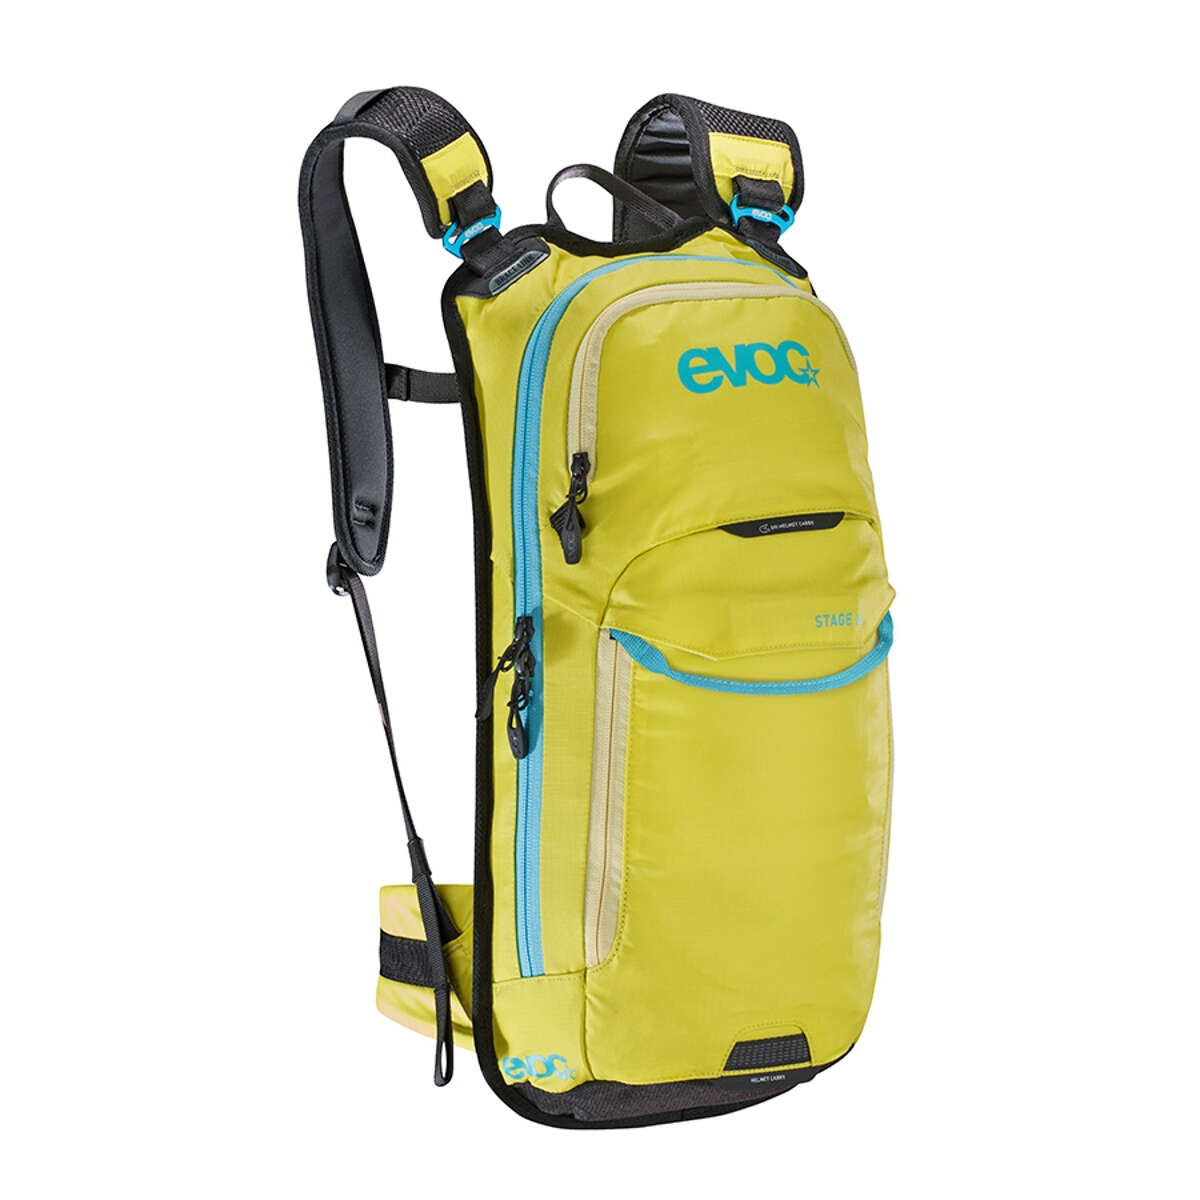 Evoc Backpack with Hydration System Compartment Stage Sulphur, 6 Liter